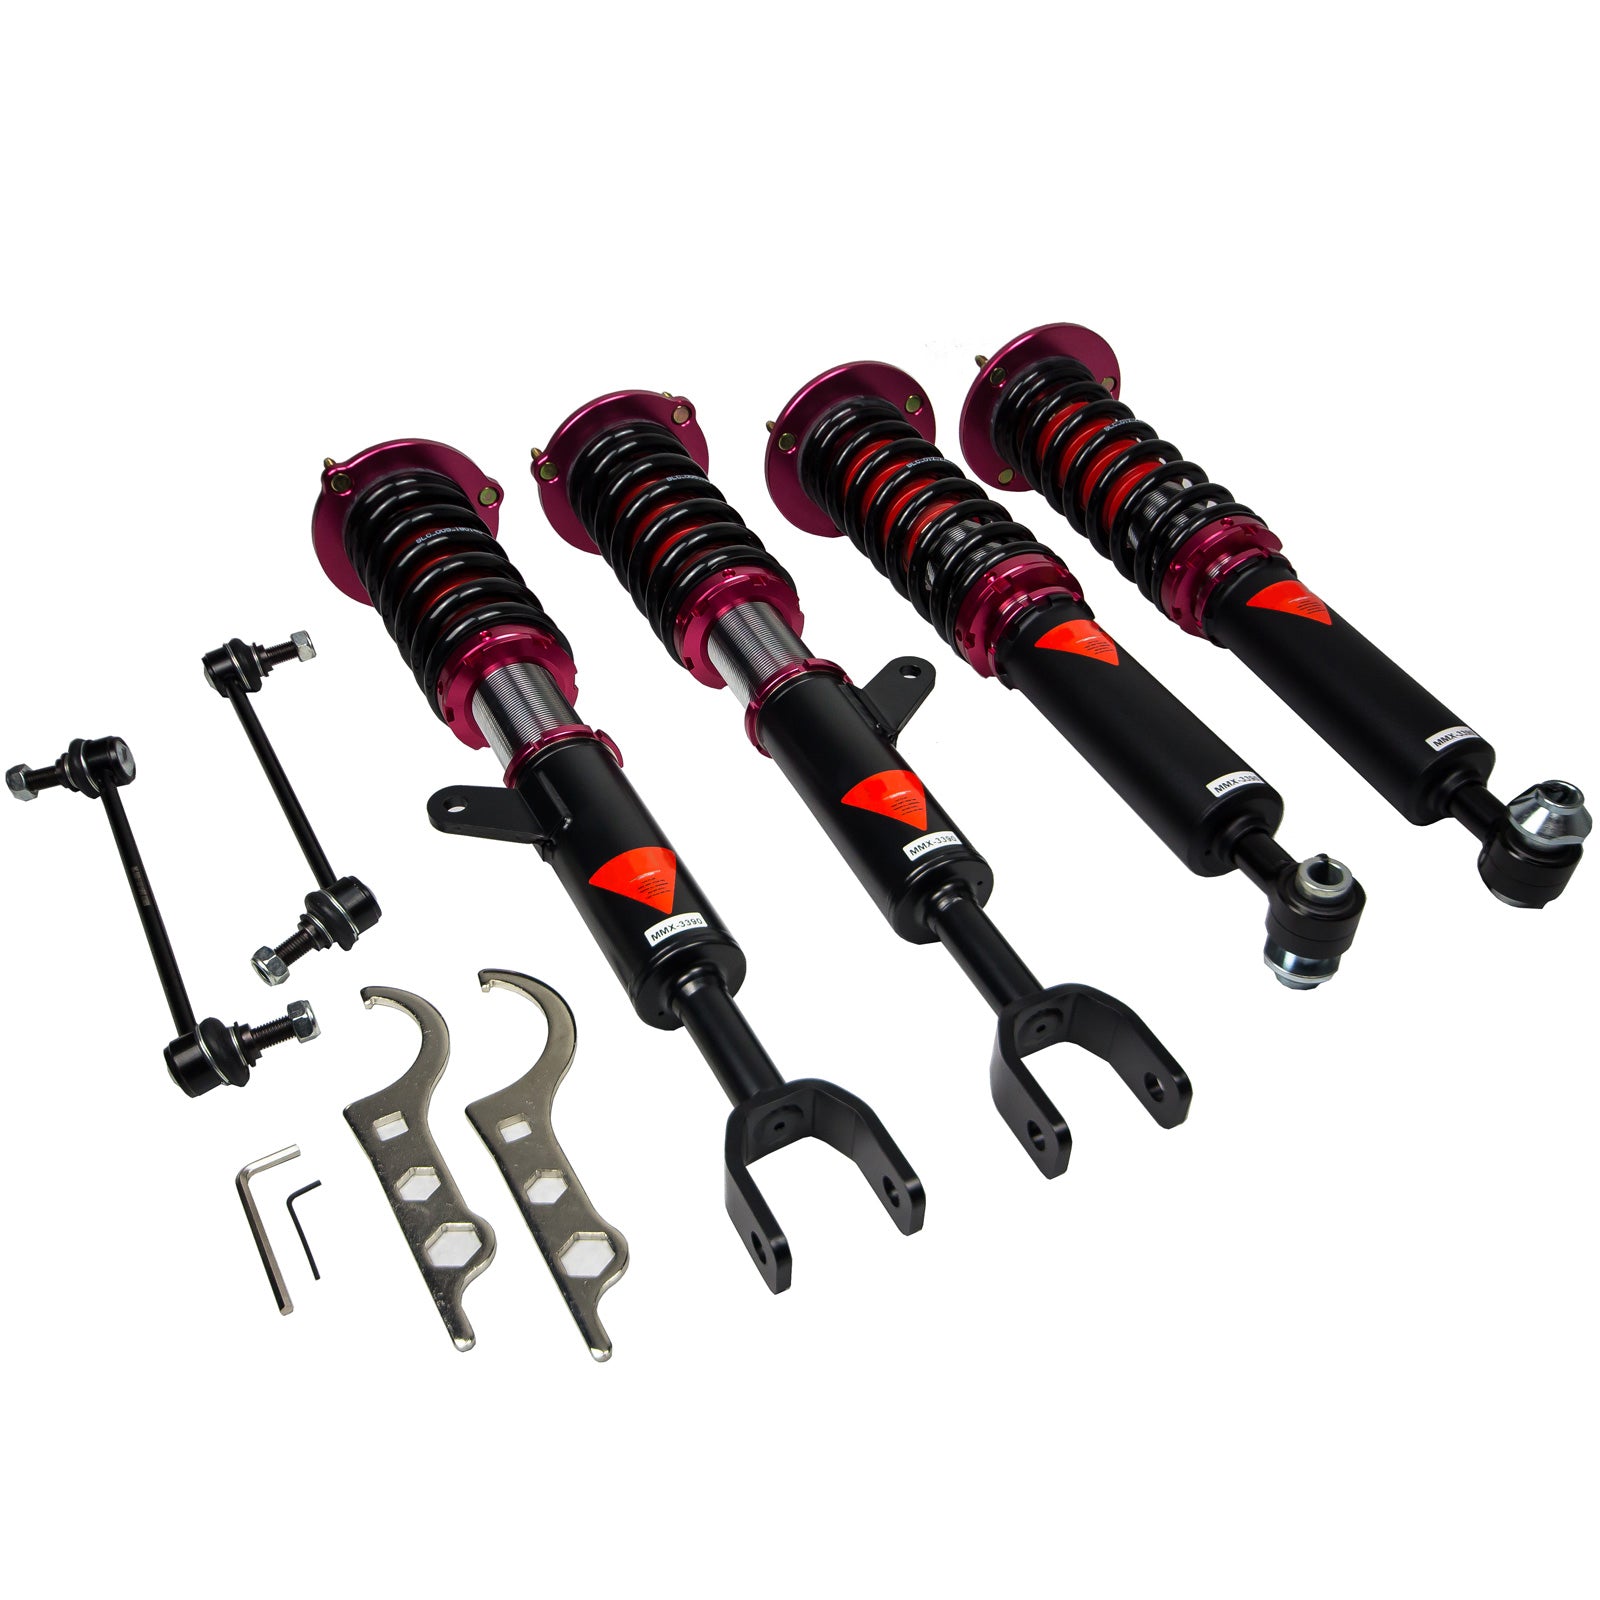 MMX3390-A MAXX Coilovers Lowering Kit, Fully Adjustable, Ride Height, 40 Clicks Rebound Settings, BMW 5-Series(F10) RWD 2010-16